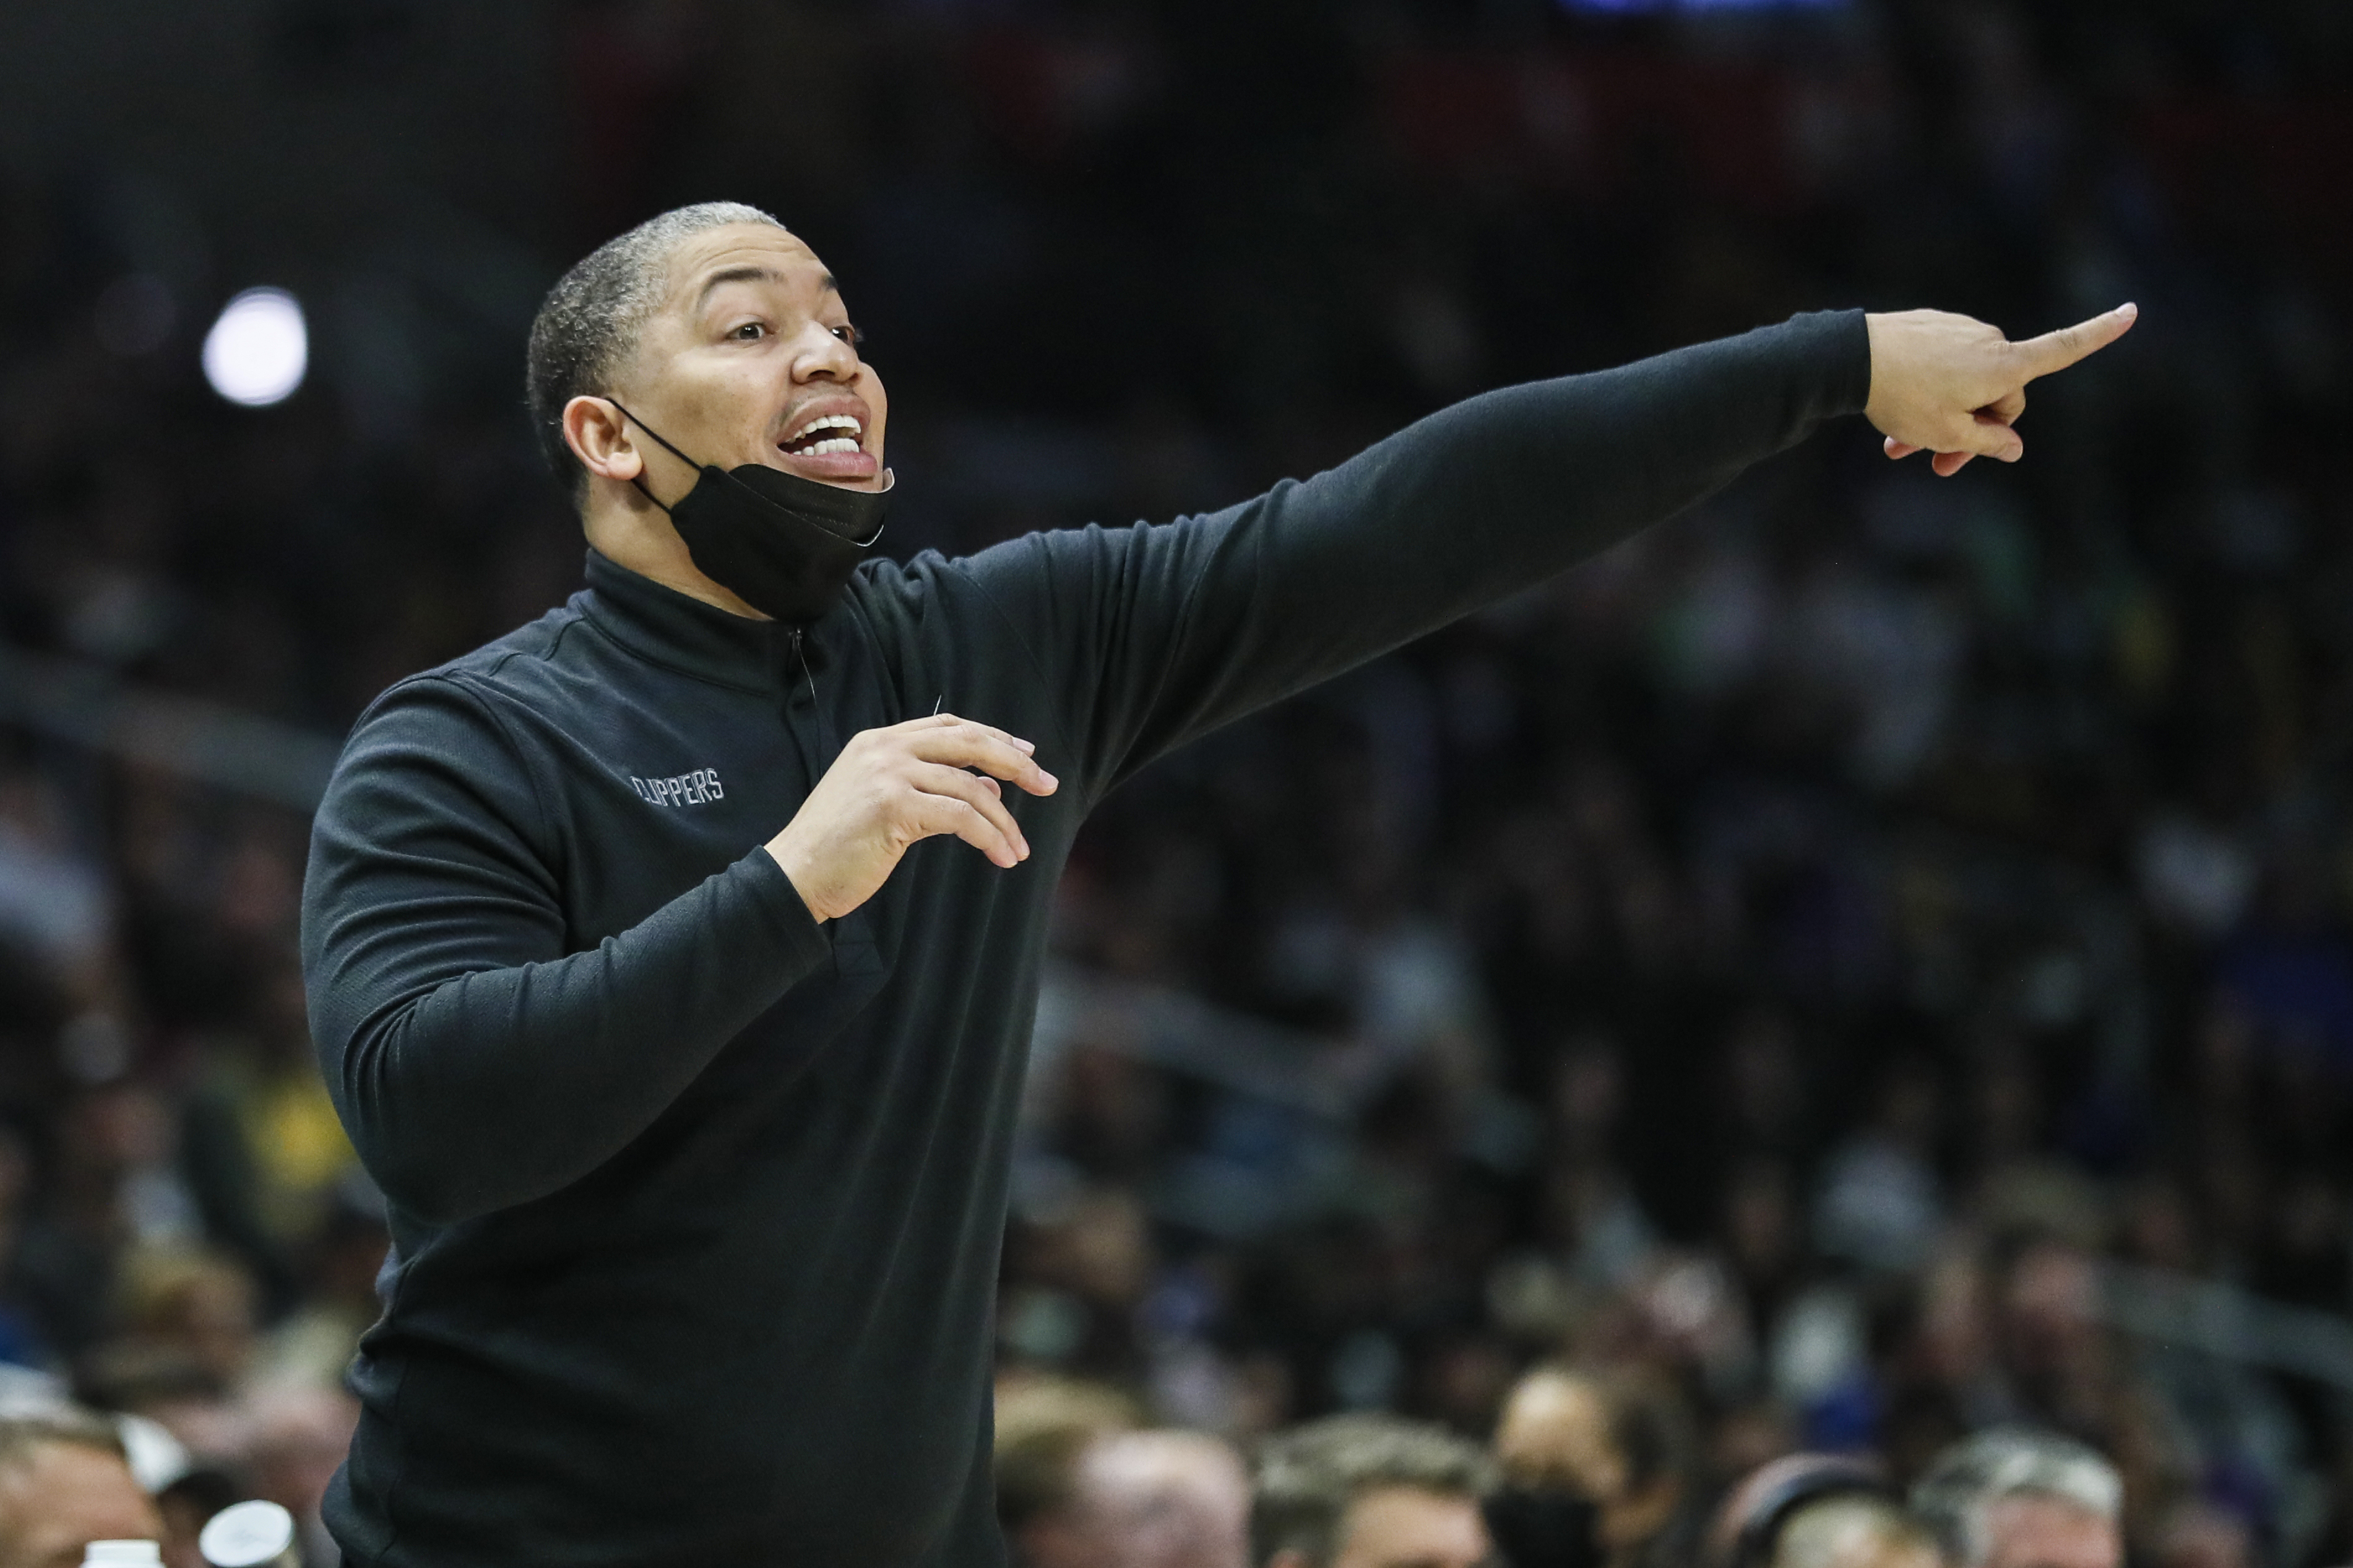 The Los Angeles Clippers are solidly in the playoff race despite getting little from Paul George and nothing from Kawhi Leonard. That's a credit to coach Tyronn Lue.